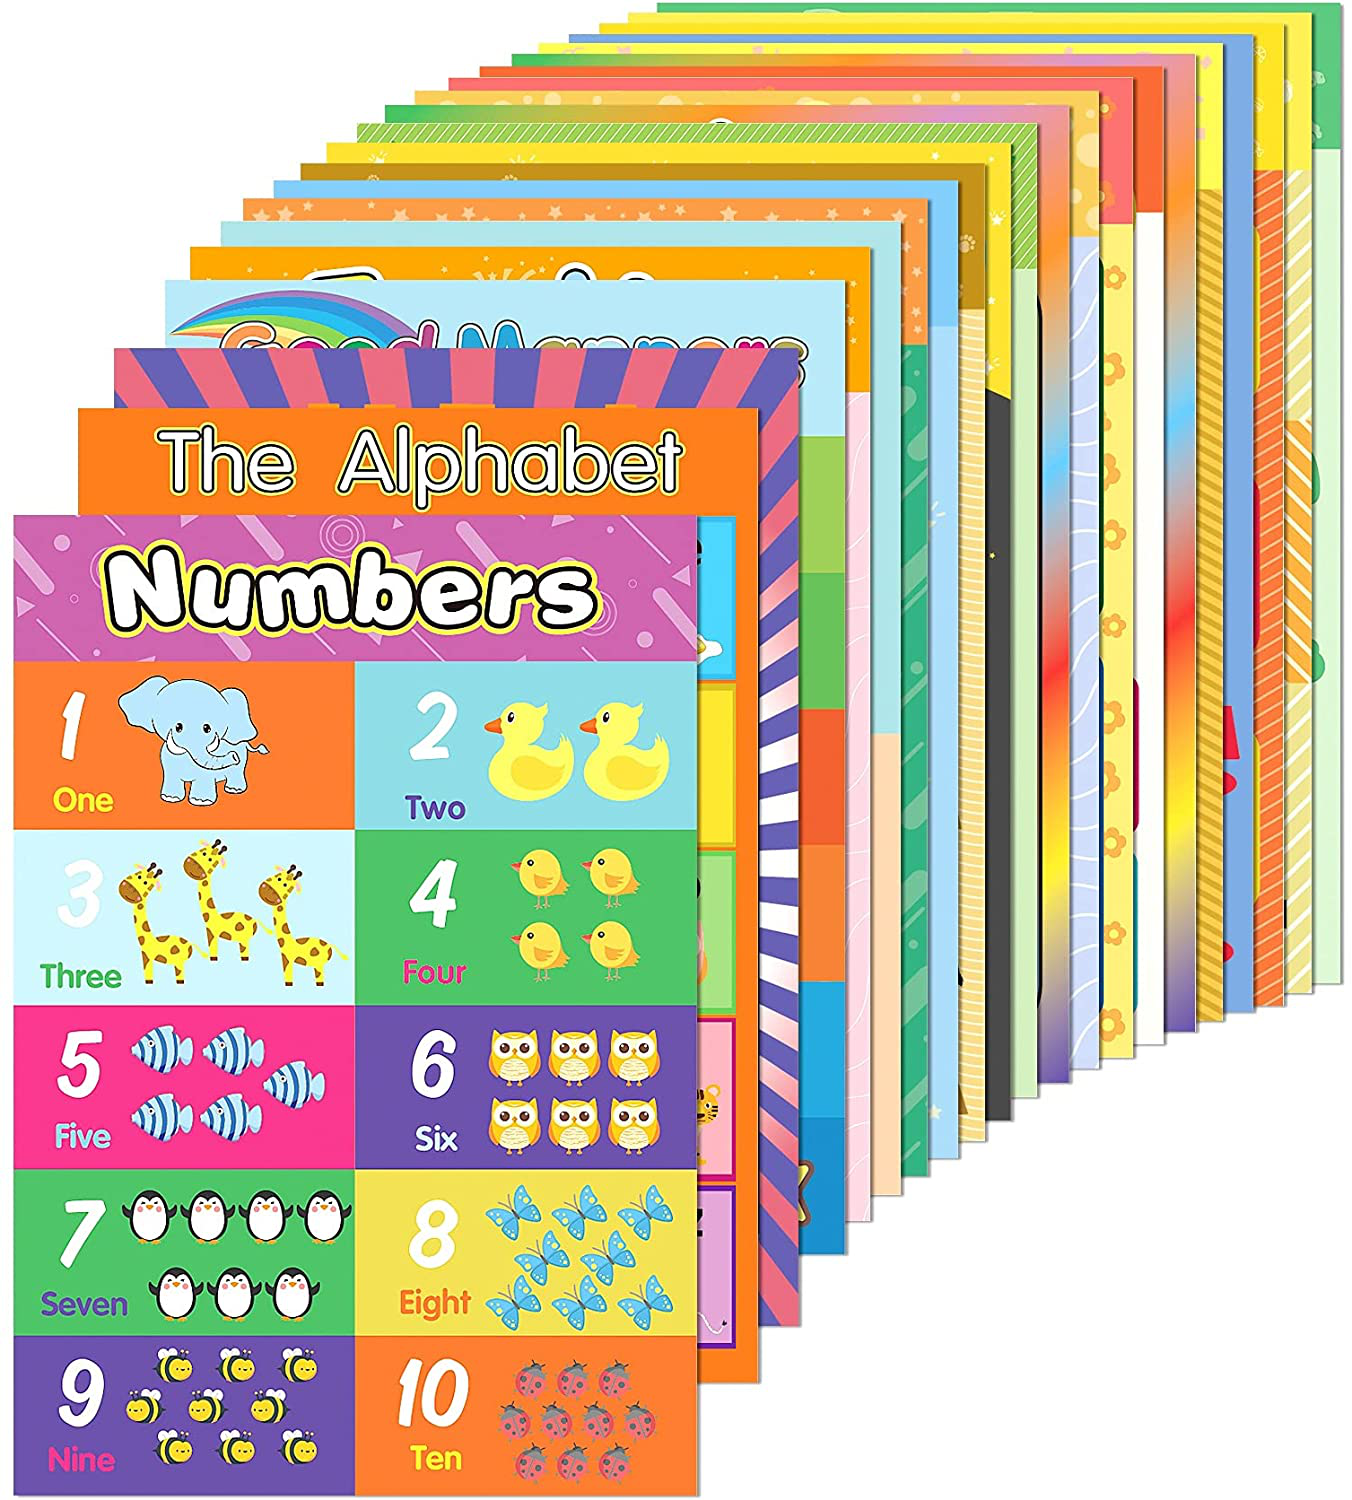 EAONE 22 Pack Classroom Posters, Classroom Supplies Kindergarten School Homeschool Teaching Materials Educational Posters Laminated PreK Learning Alphabet with 100 Pcs Glue Point Dot(15.75 x 11 Inch)